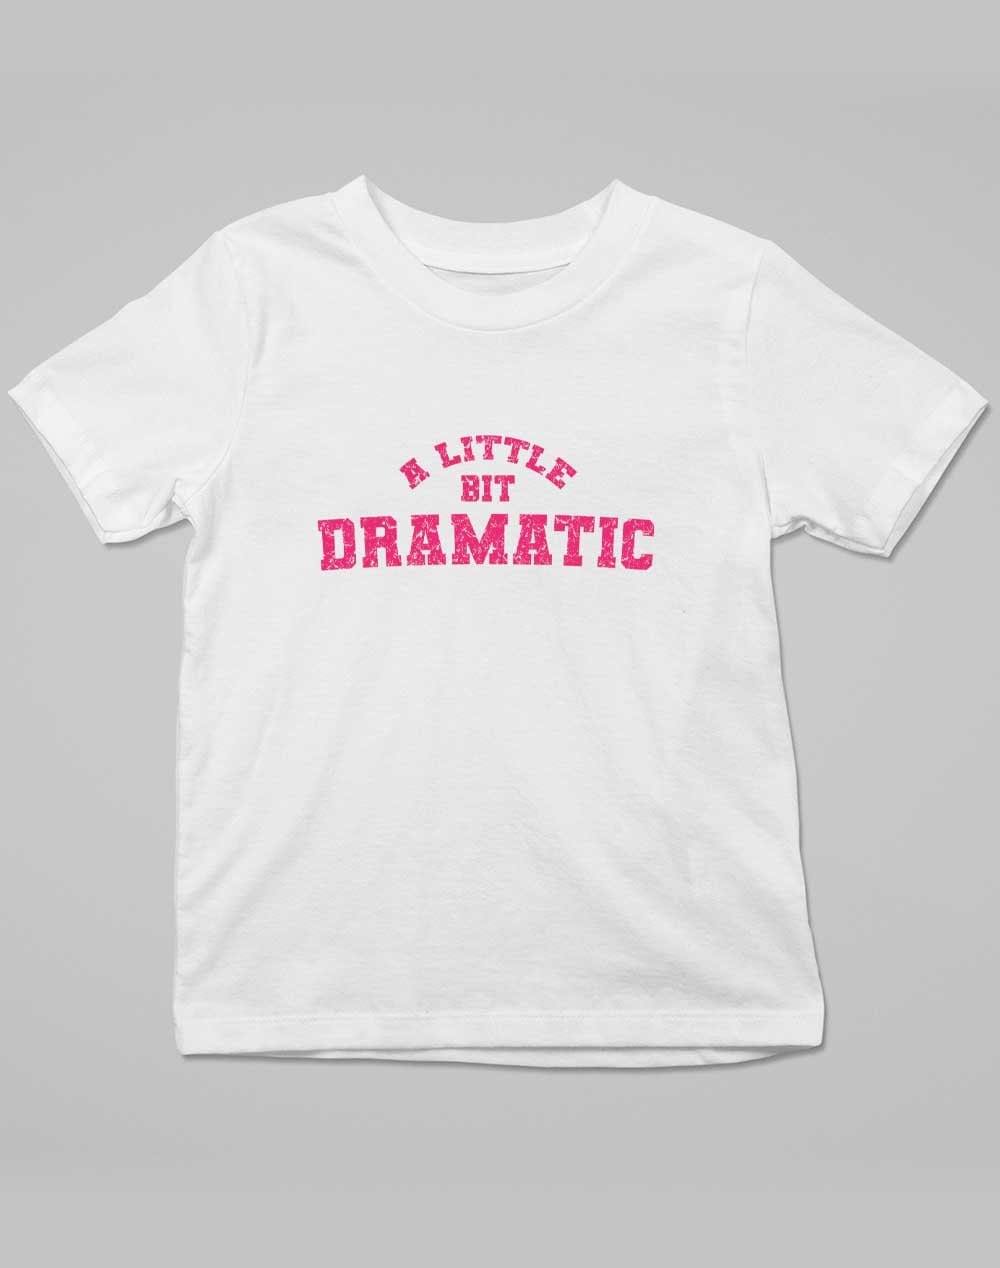 A Little Bit Dramatic Distressed Kids T-Shirt 3-4 years / White  - Off World Tees